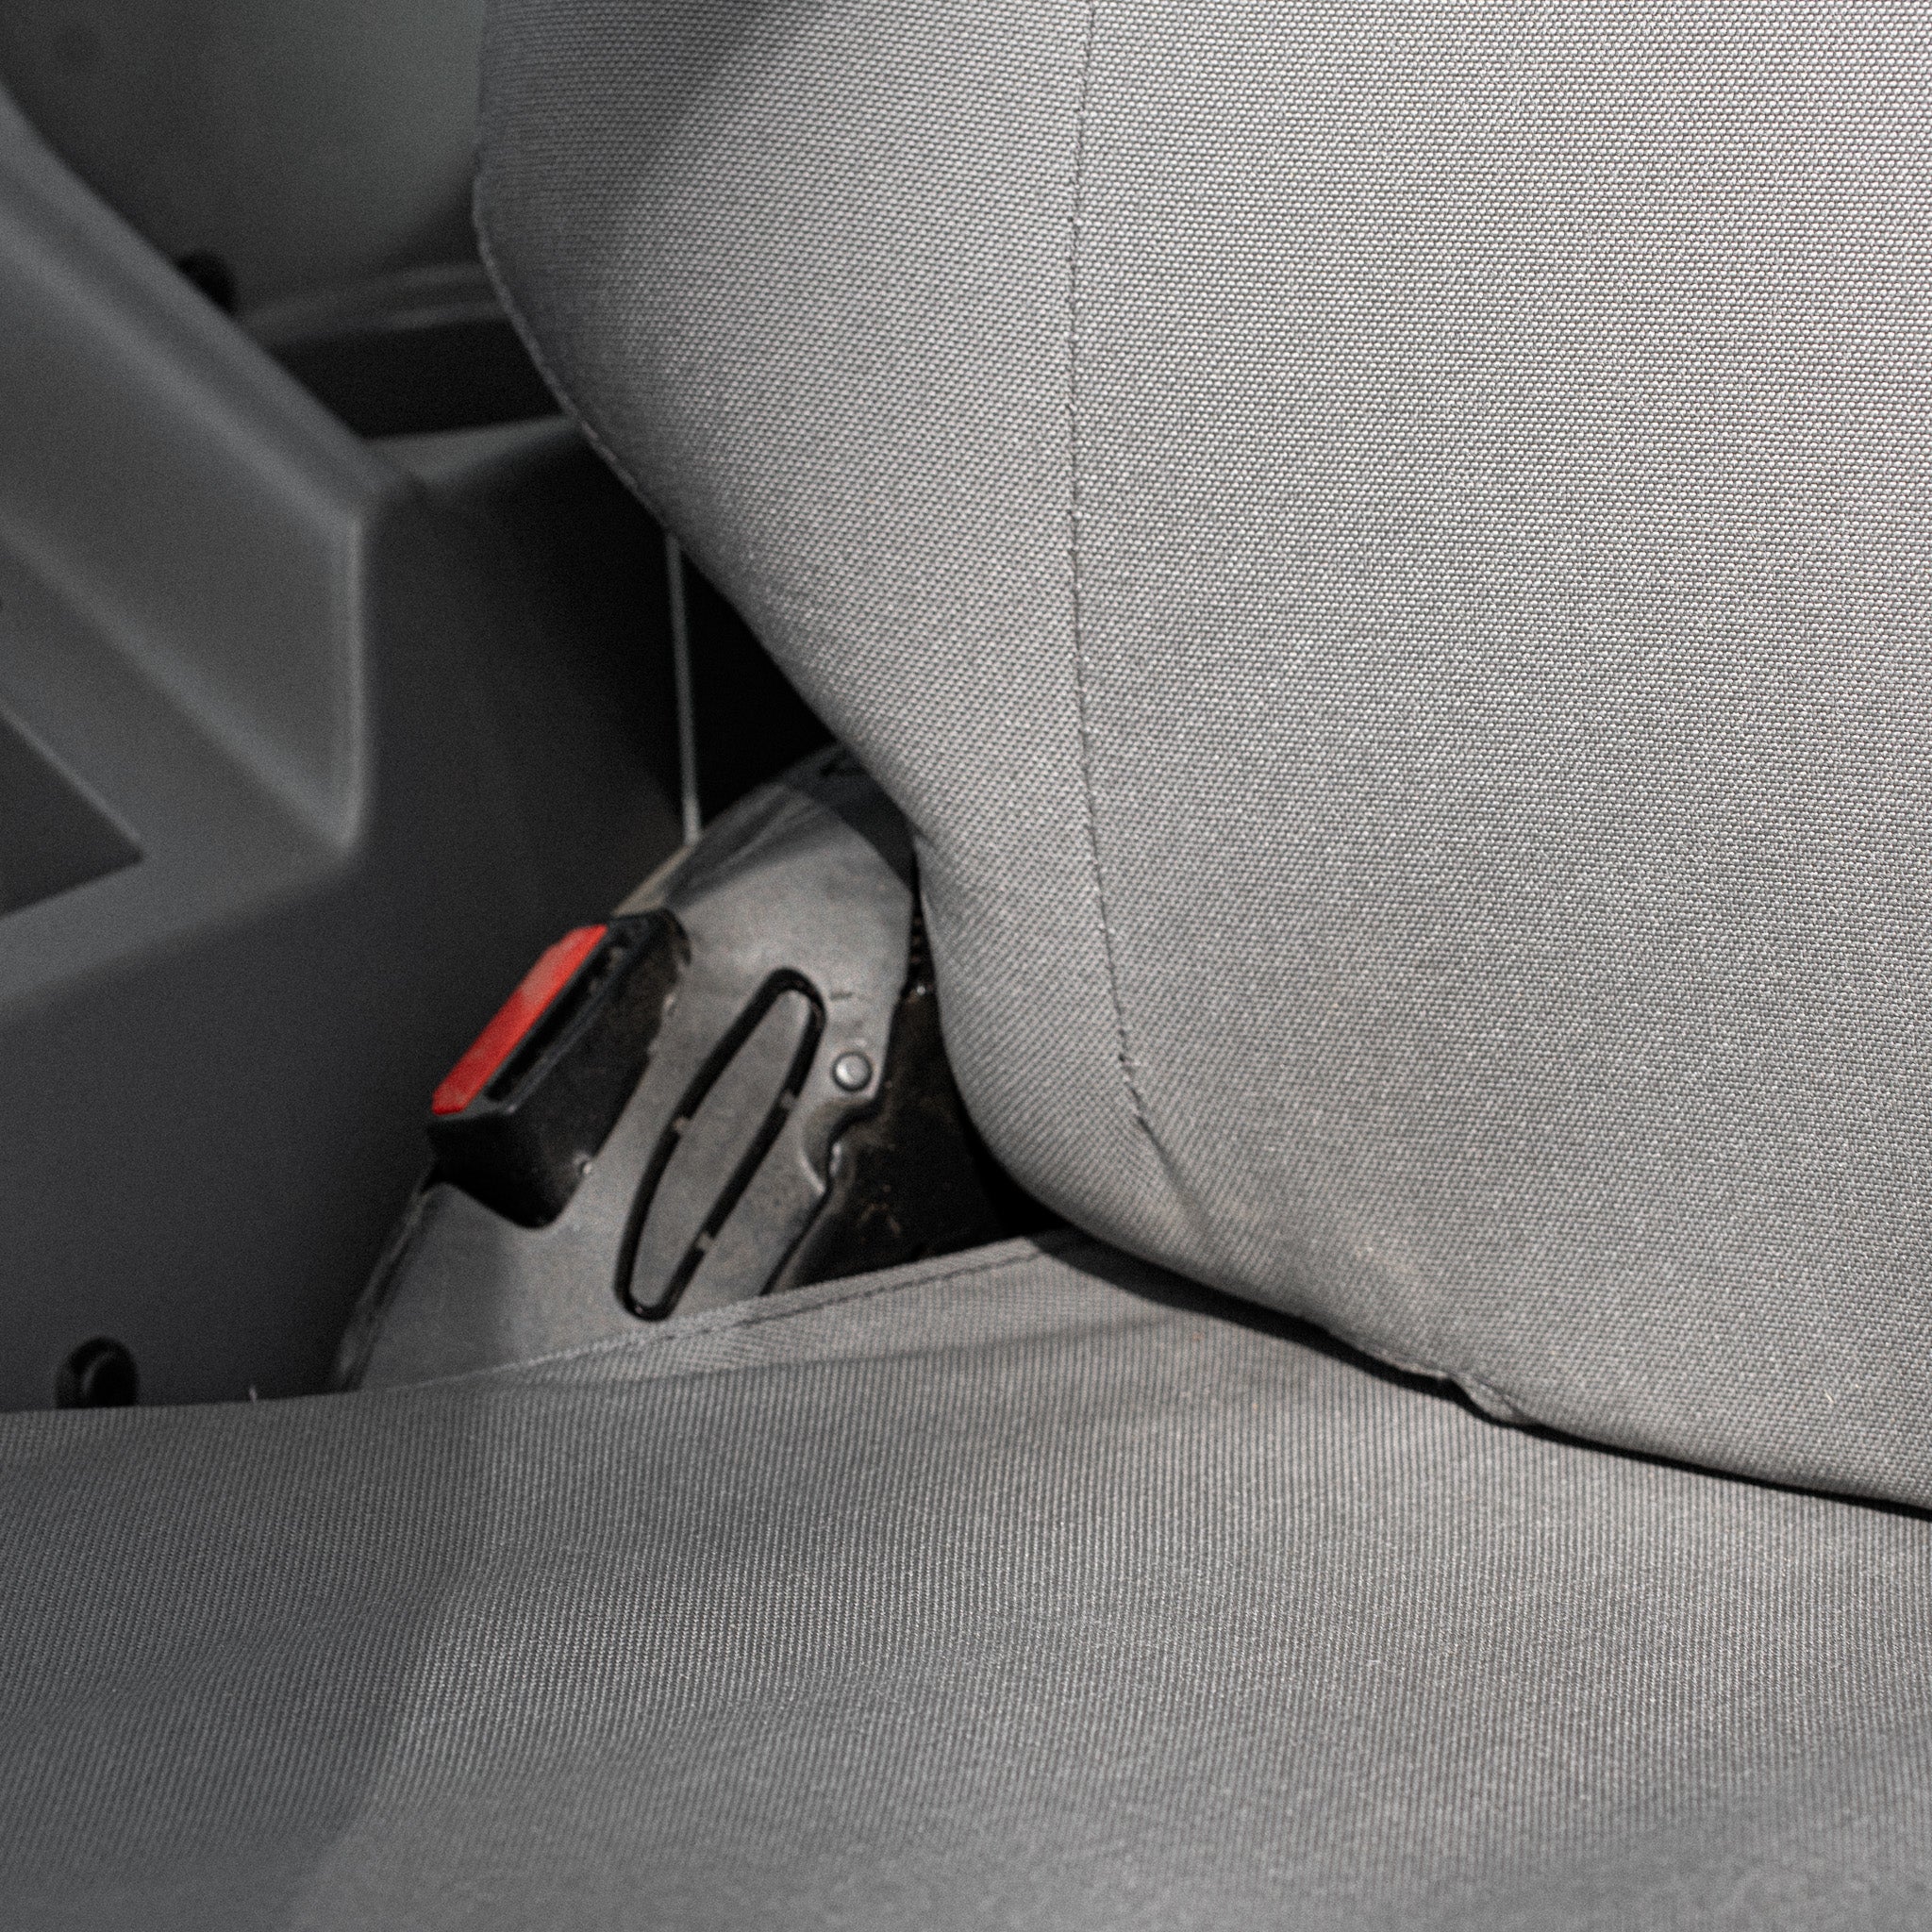 The seat cover has a snug fit so that it stays in place with no shifting or bunching.